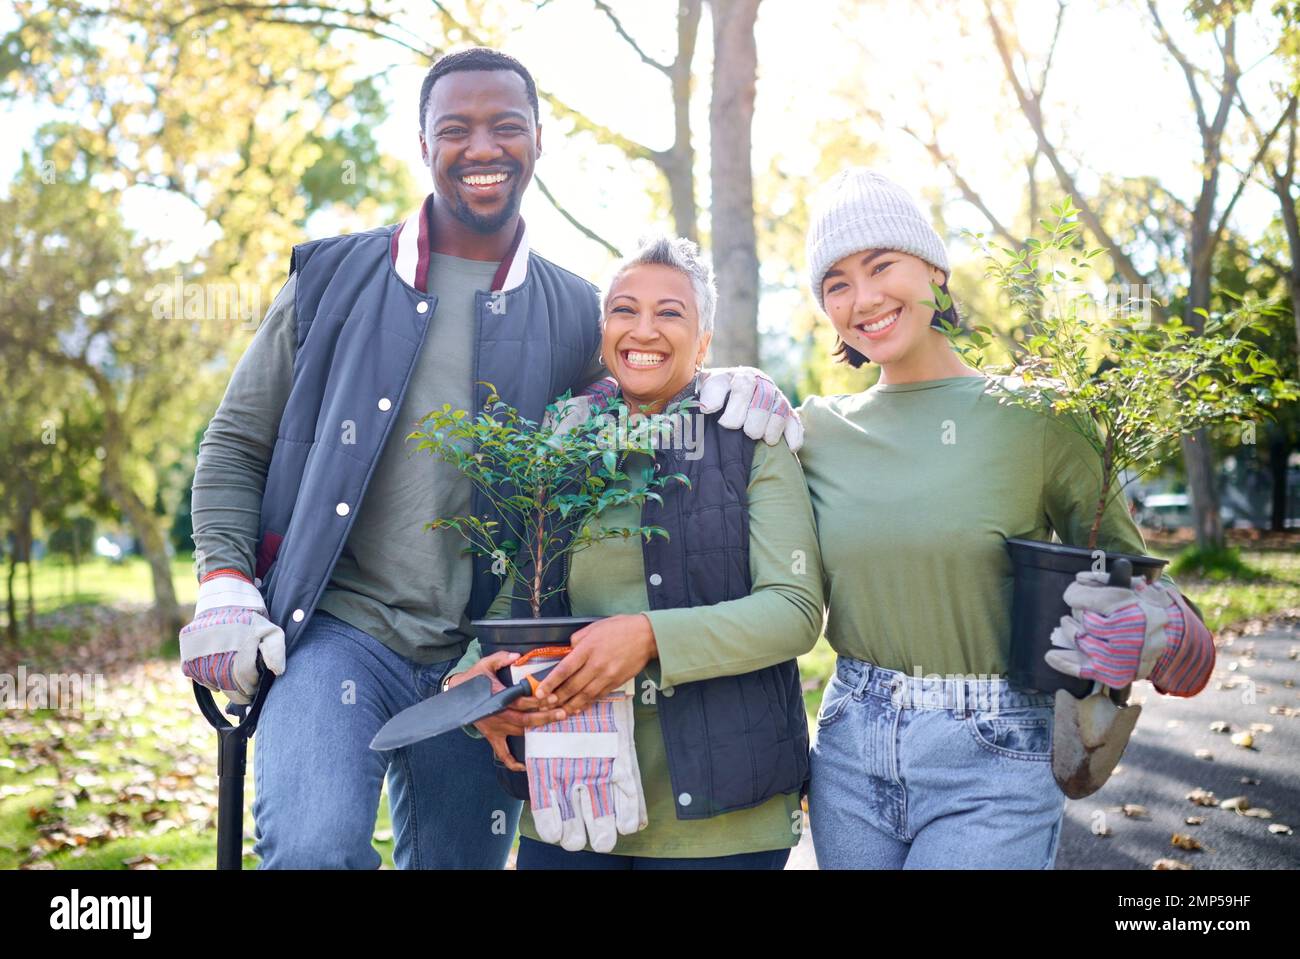 Trees, garden and plants people in portrait community service, sustainability collaboration and eco friendly project. Gardening, sustainable growth Stock Photo